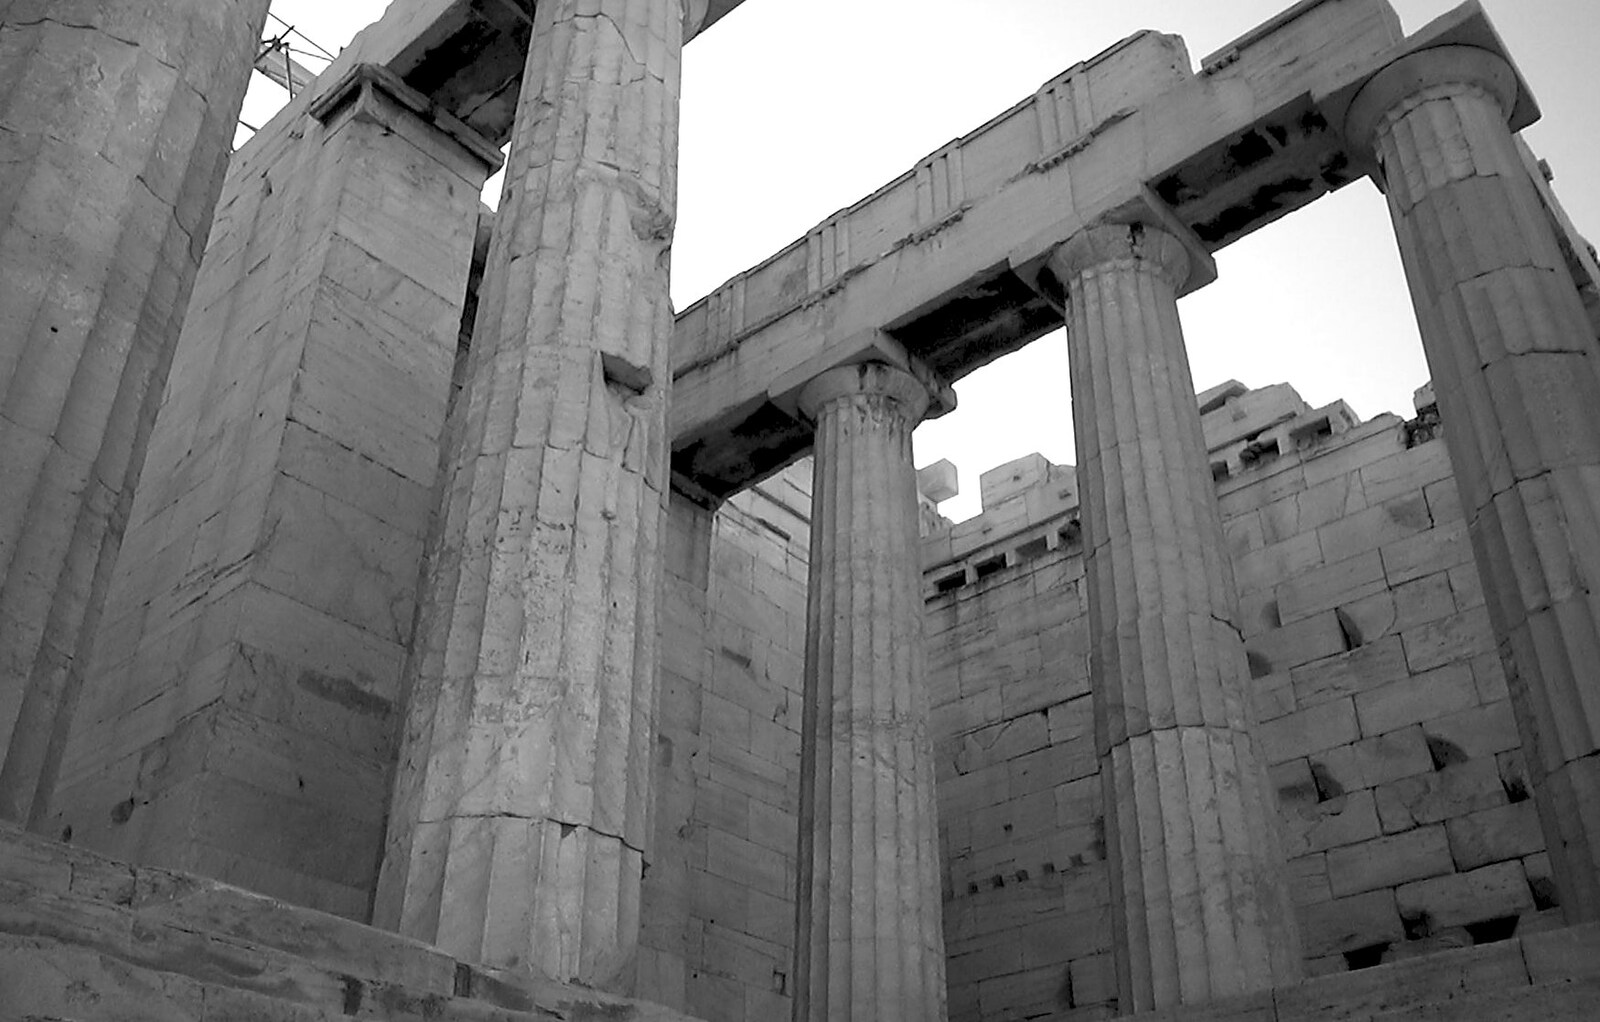 The Propylaia - entrance temple to the Acropolis from A Postcard From Athens: A Day Trip to the Olympics, Greece - 19th August 2004